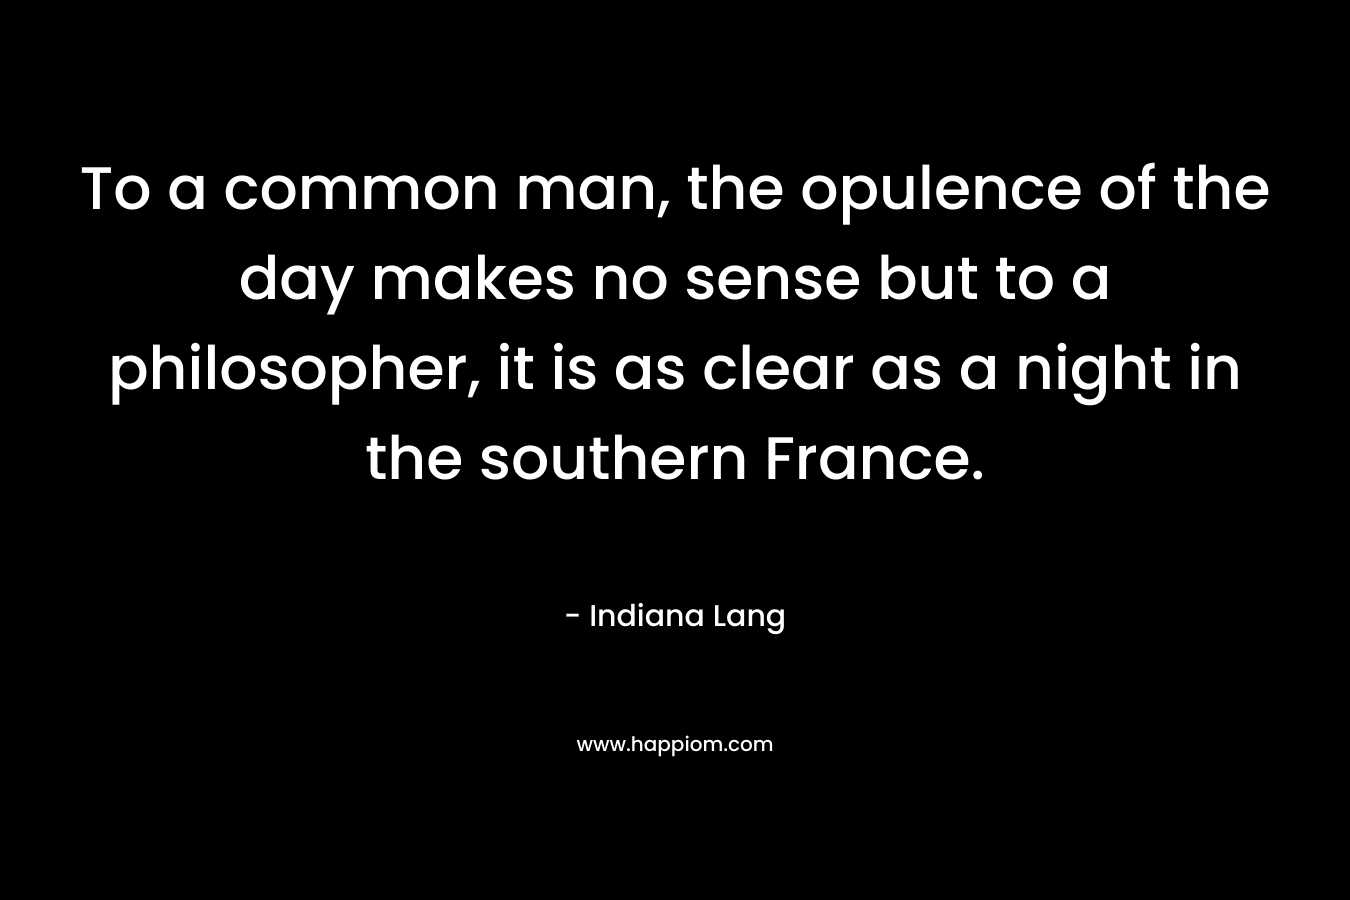 To a common man, the opulence of the day makes no sense but to a philosopher, it is as clear as a night in the southern France. – Indiana Lang